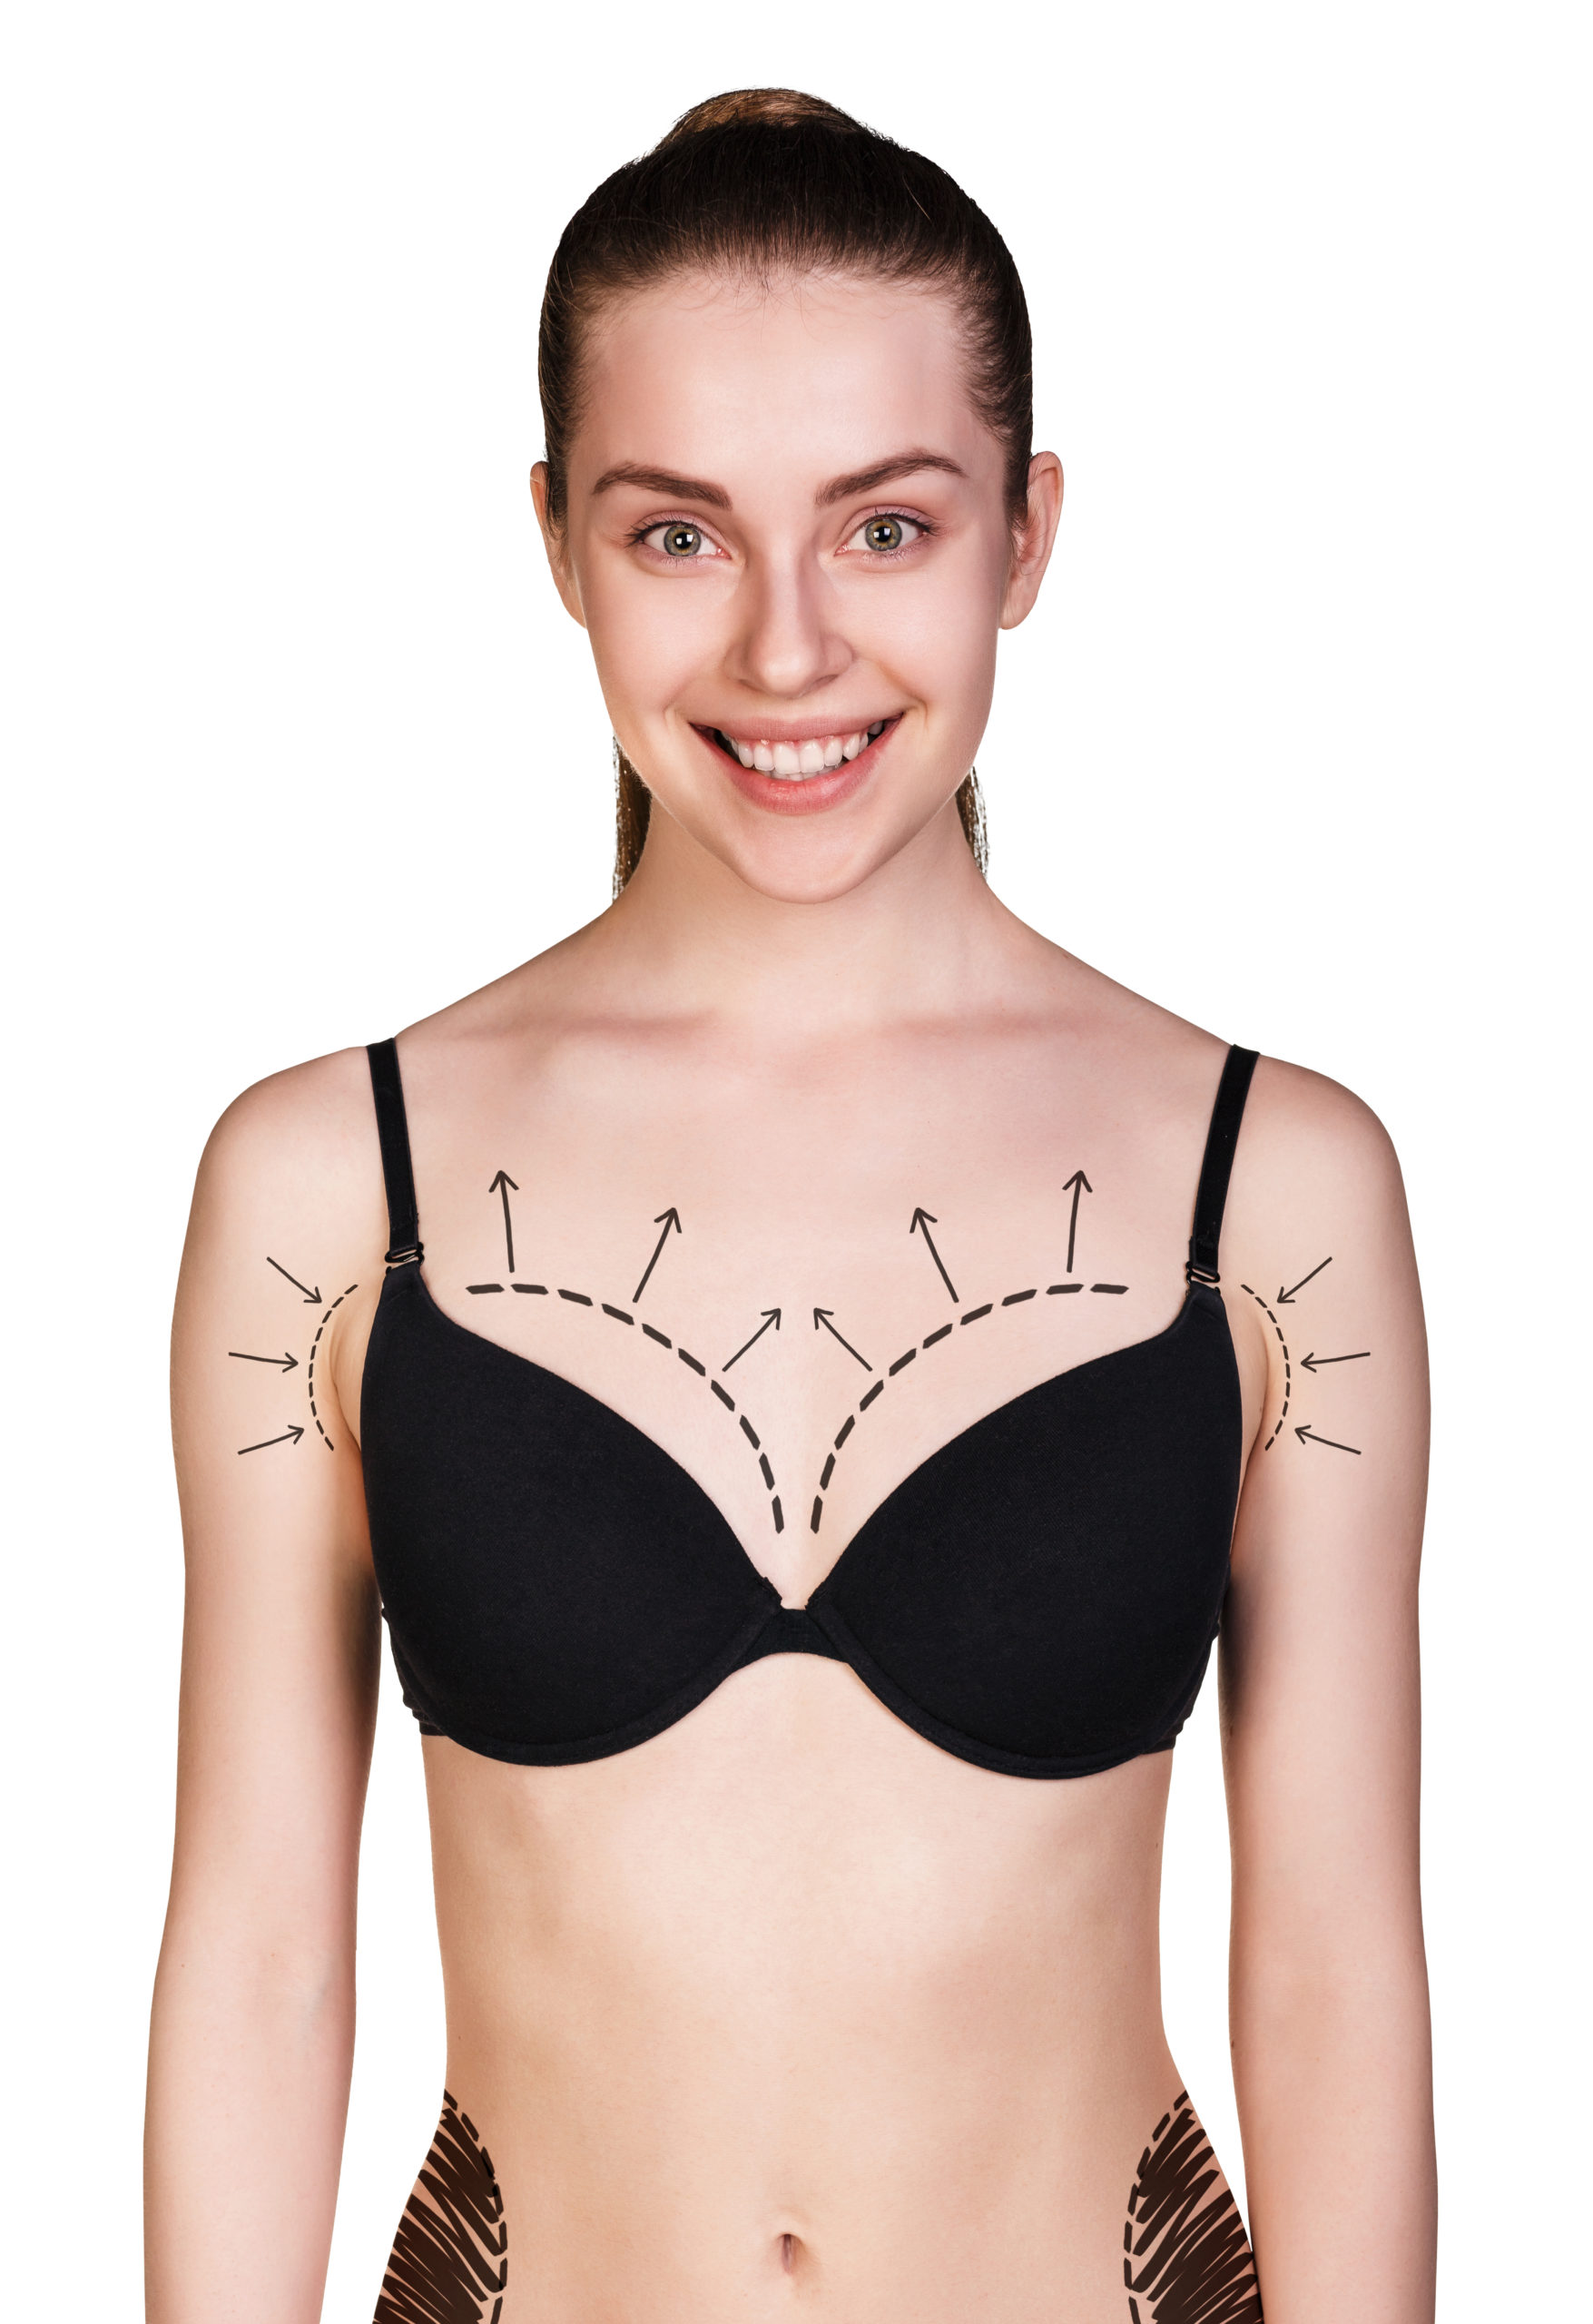 When can you wear underwire bra after breast augmentation? - Power